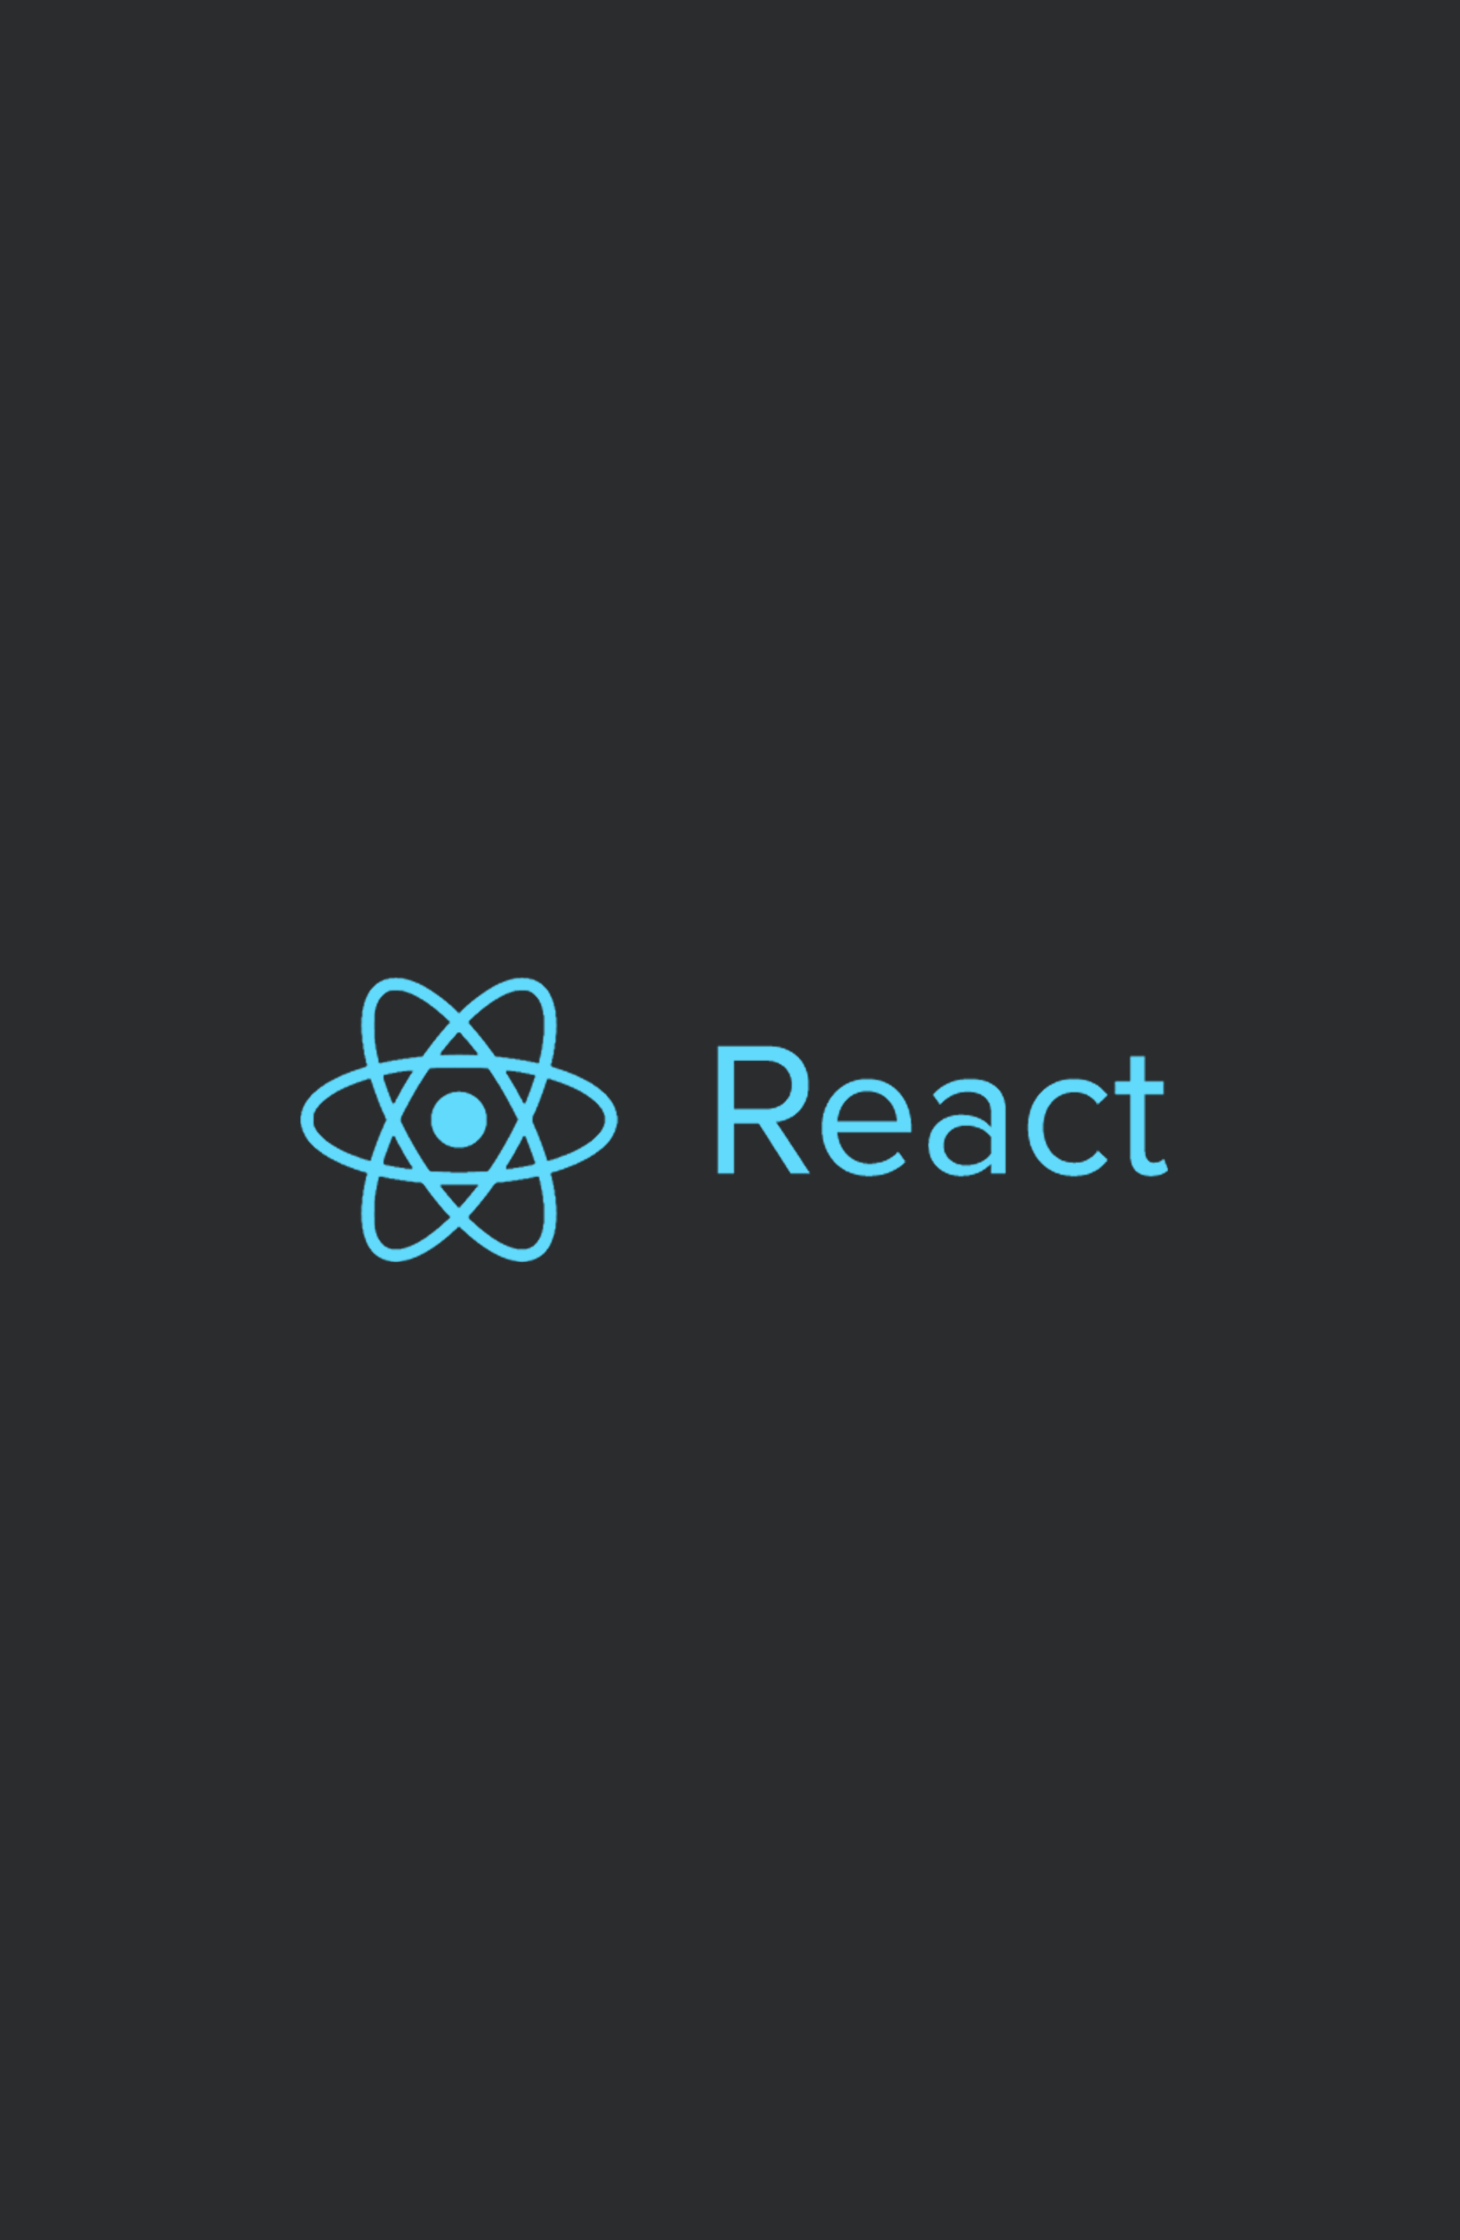 ReactJS Components: Class-Based vs Functional